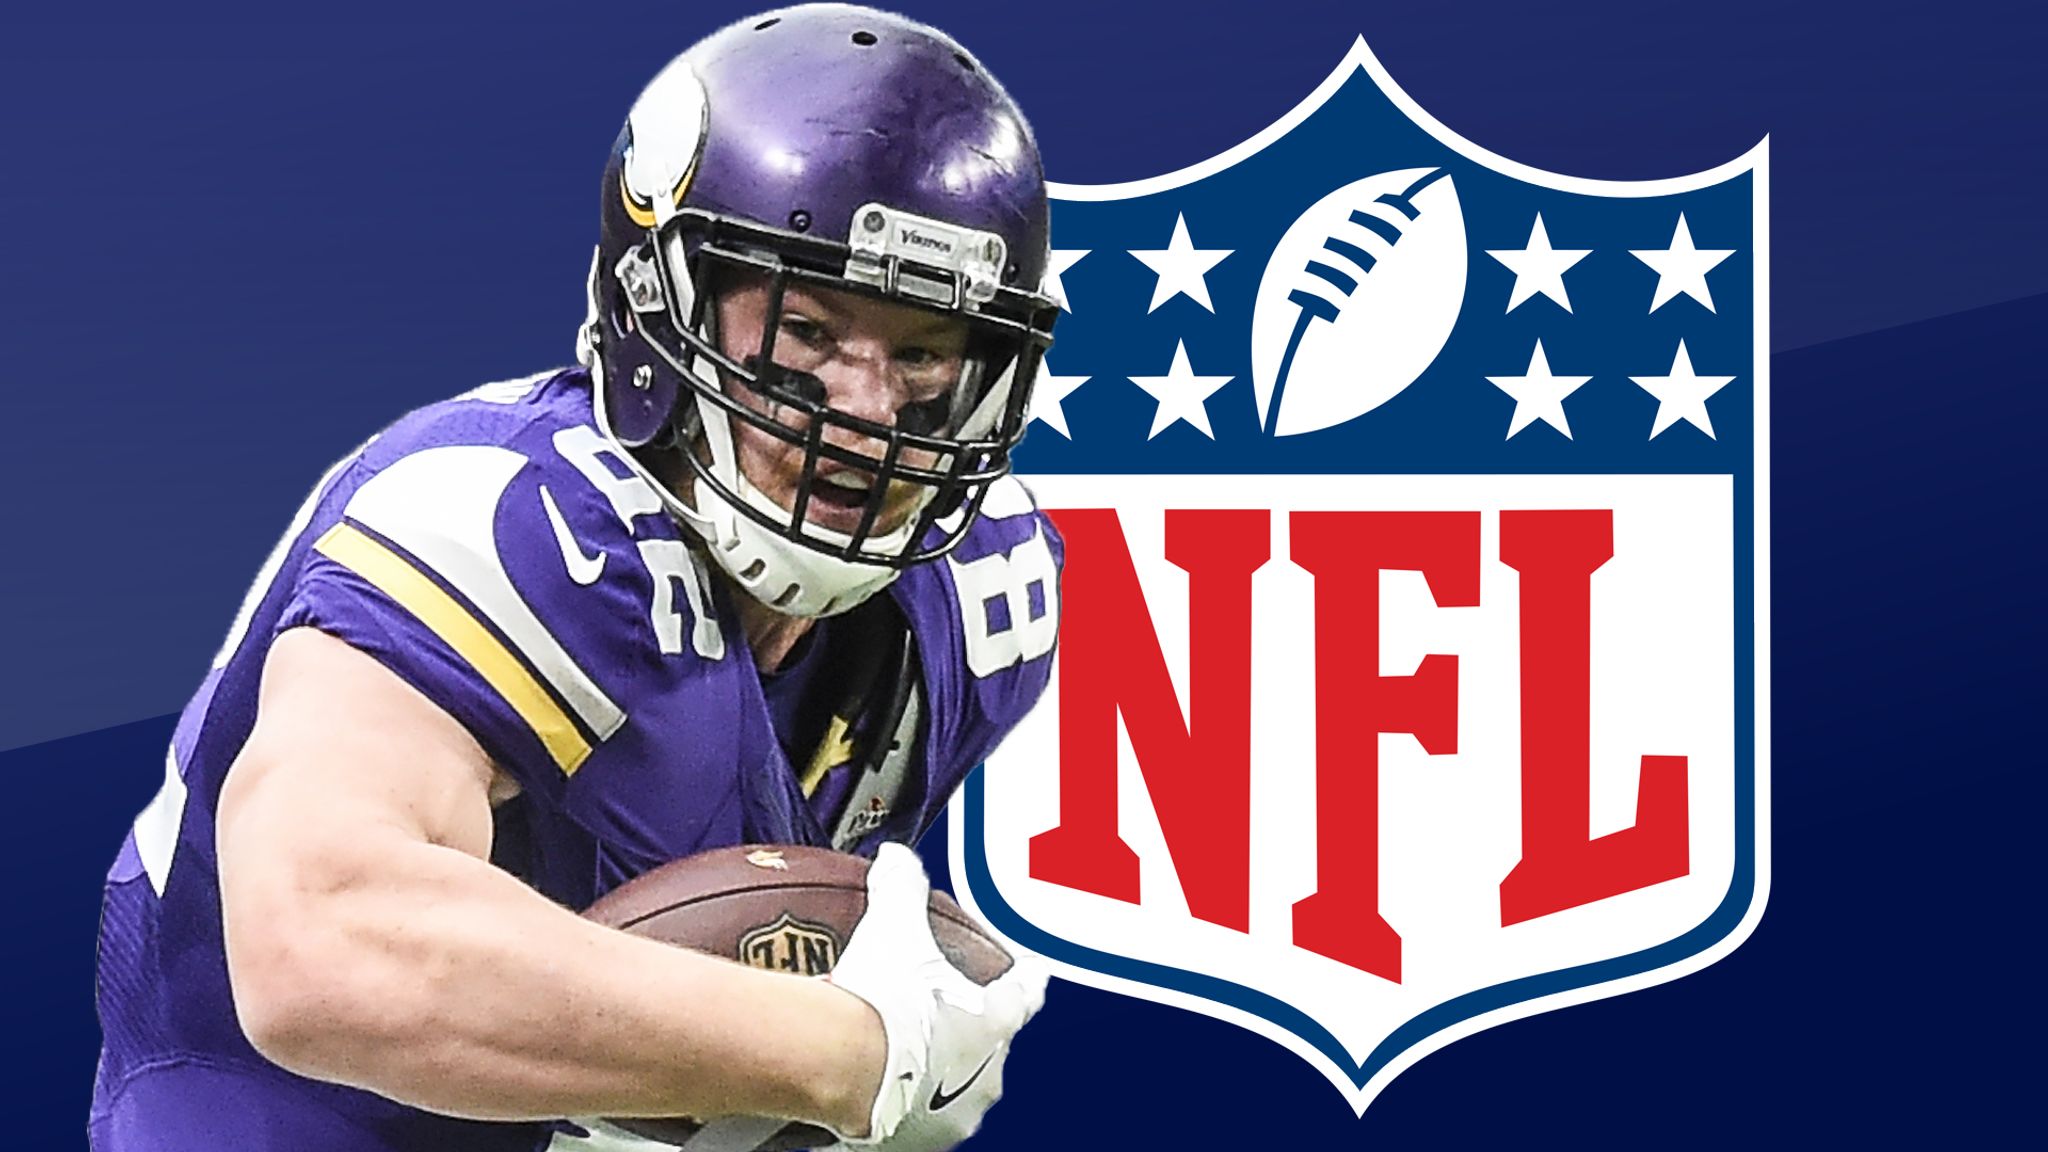 Kyle Rudolph S Nfl Blog Stefon Diggs Loves The Camera Dalvin Cook Injury A Big Blow Nfl News Sky Sports